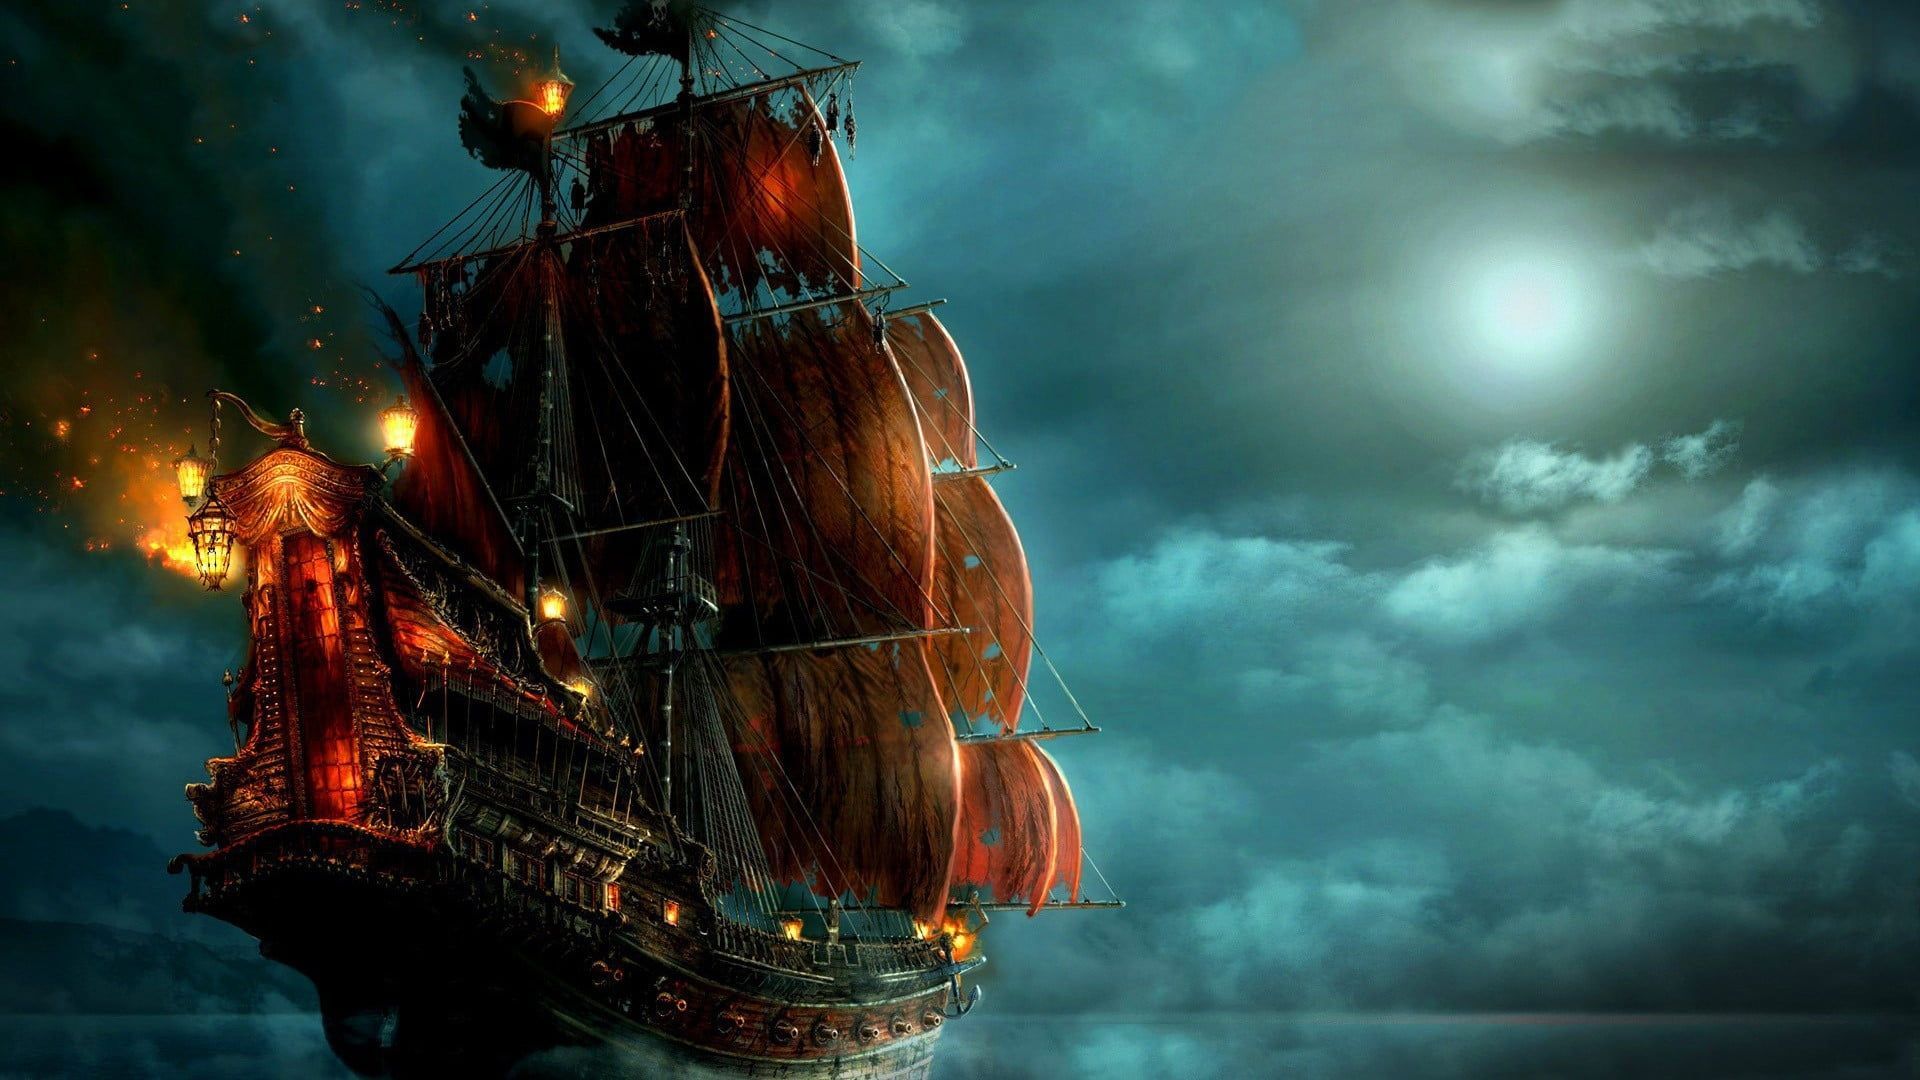 black and red pirate ship illustration #pirates #ship #night